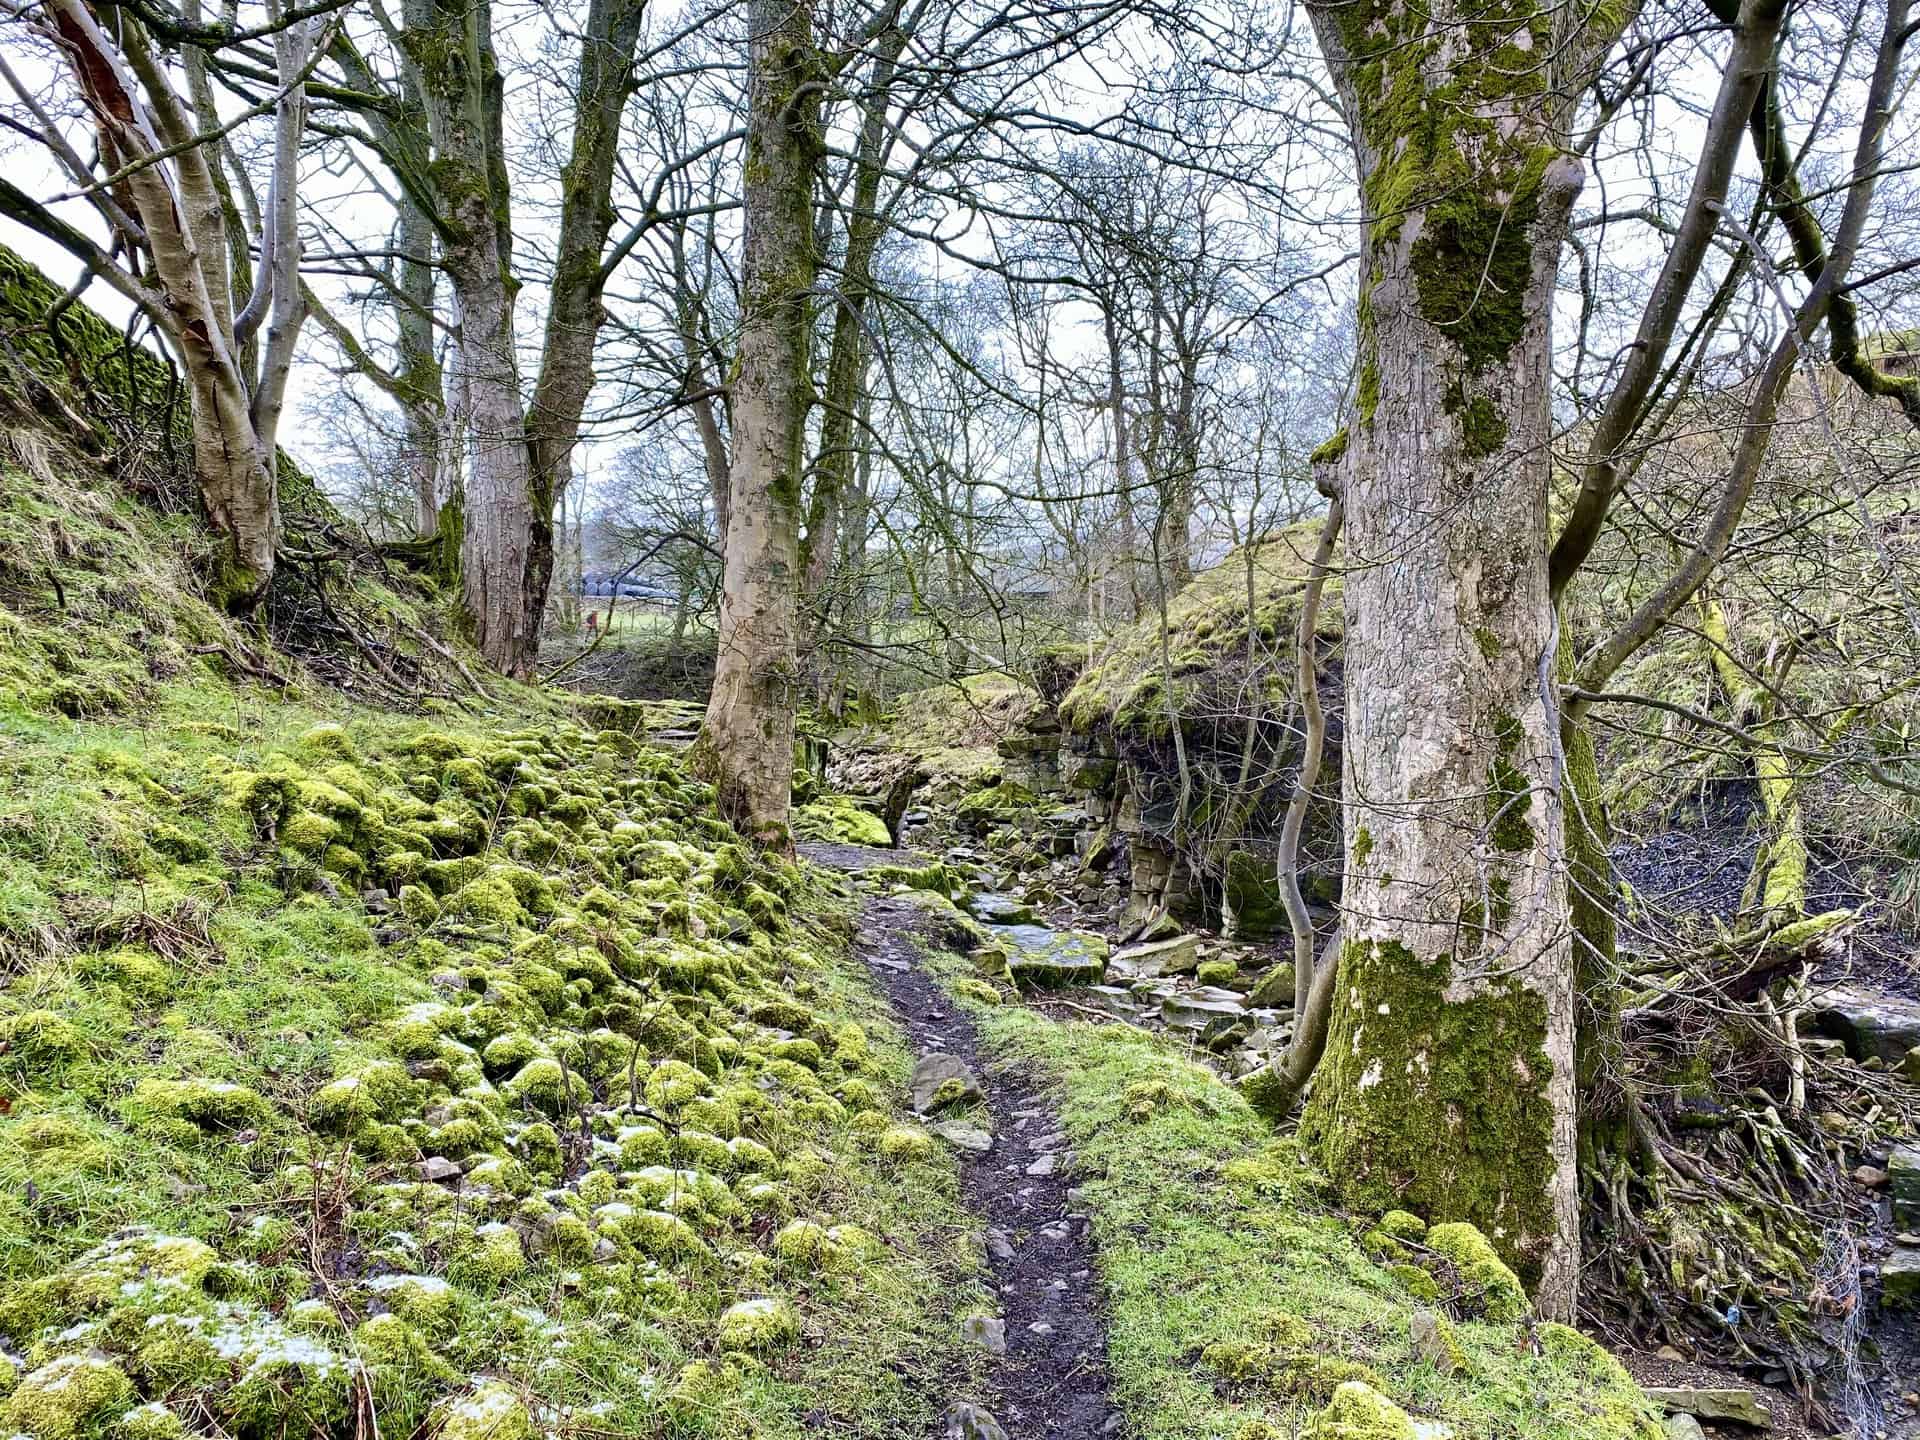 Along the Nidderdale Way, adjacent to the River Nidd near Limley Farm. A picturesque scene with ancient trees and riverside boulders adorned in lush, green moss.